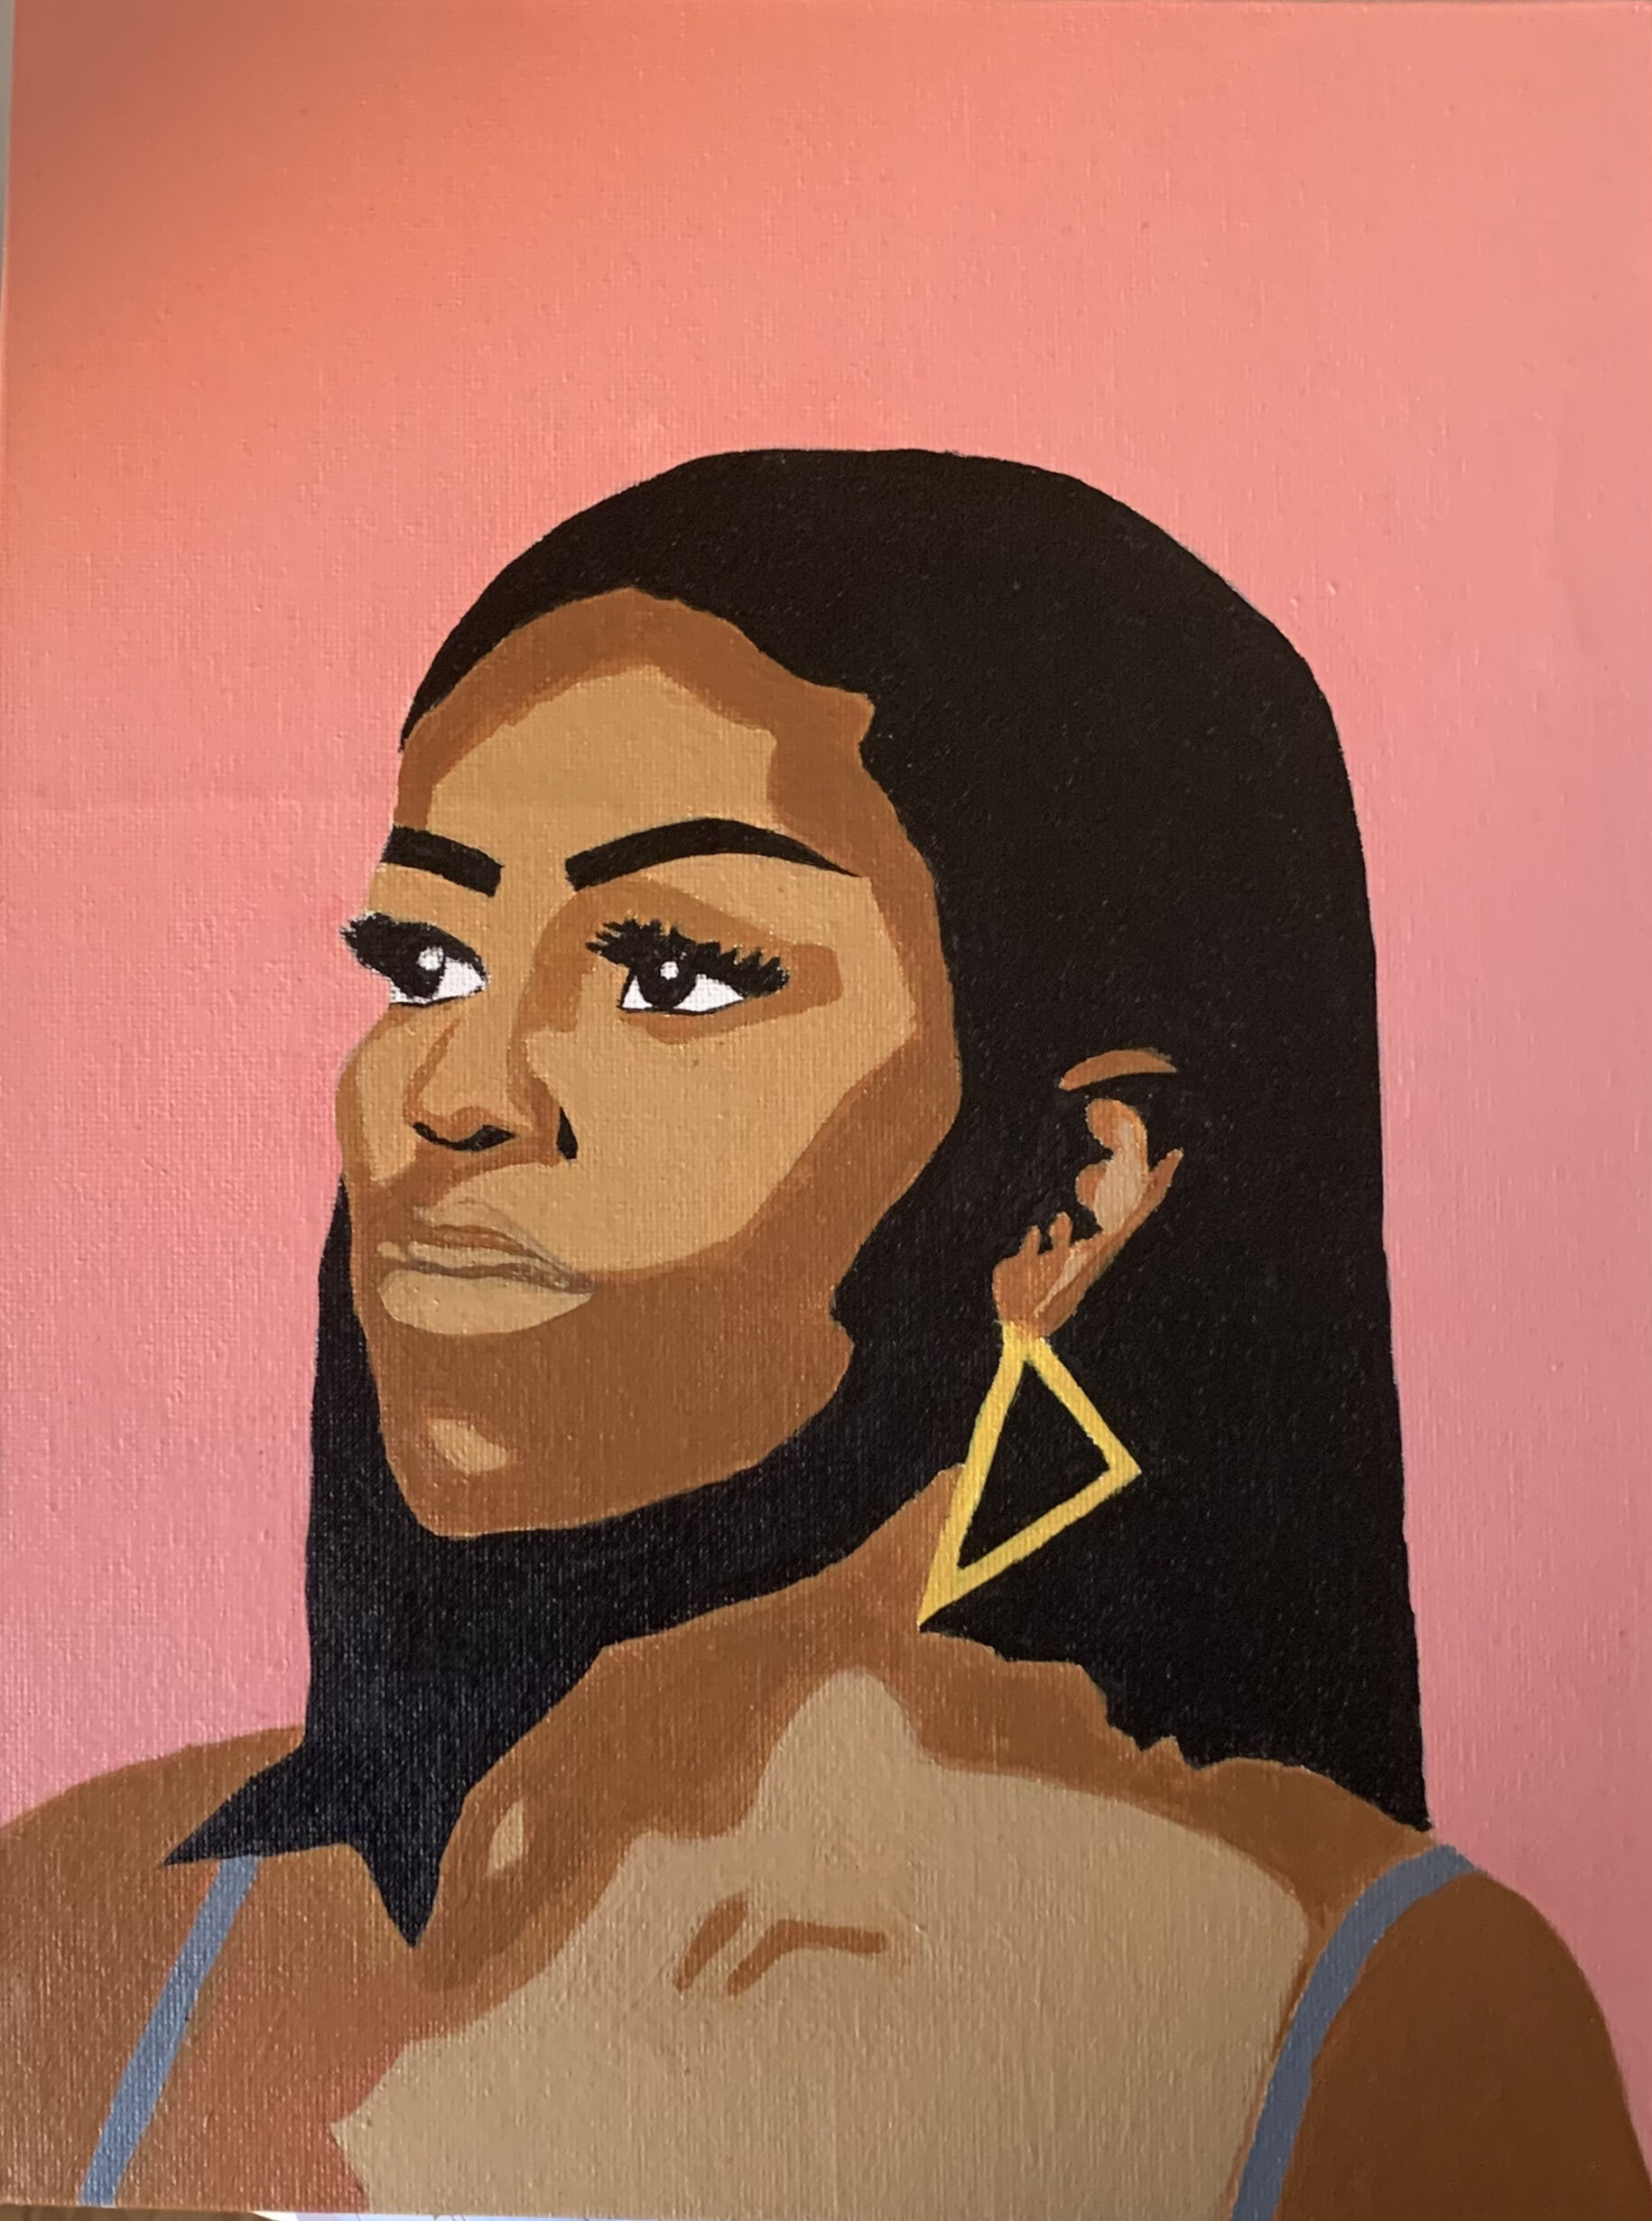 A portrait of Michelle Obama against a peach background. 